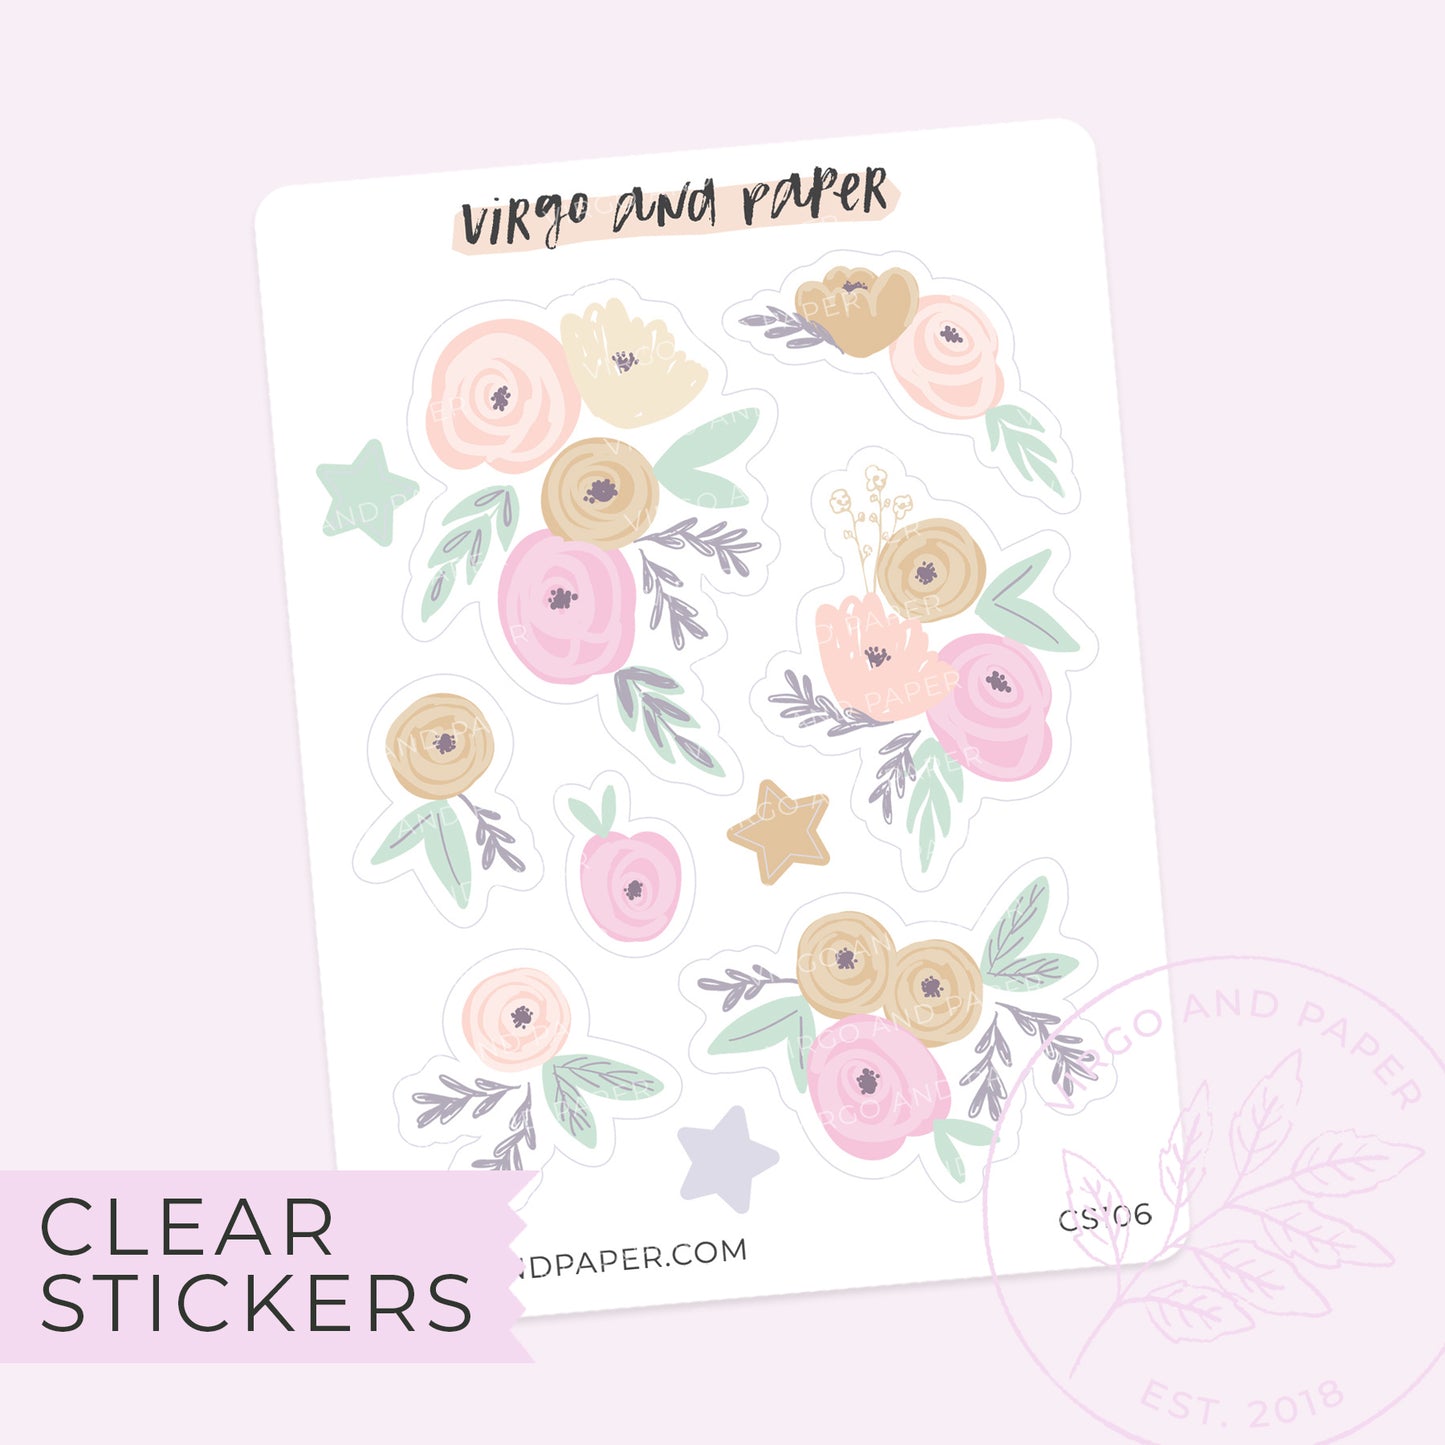 Clear Create Floral Stickers – Virgo and Paper